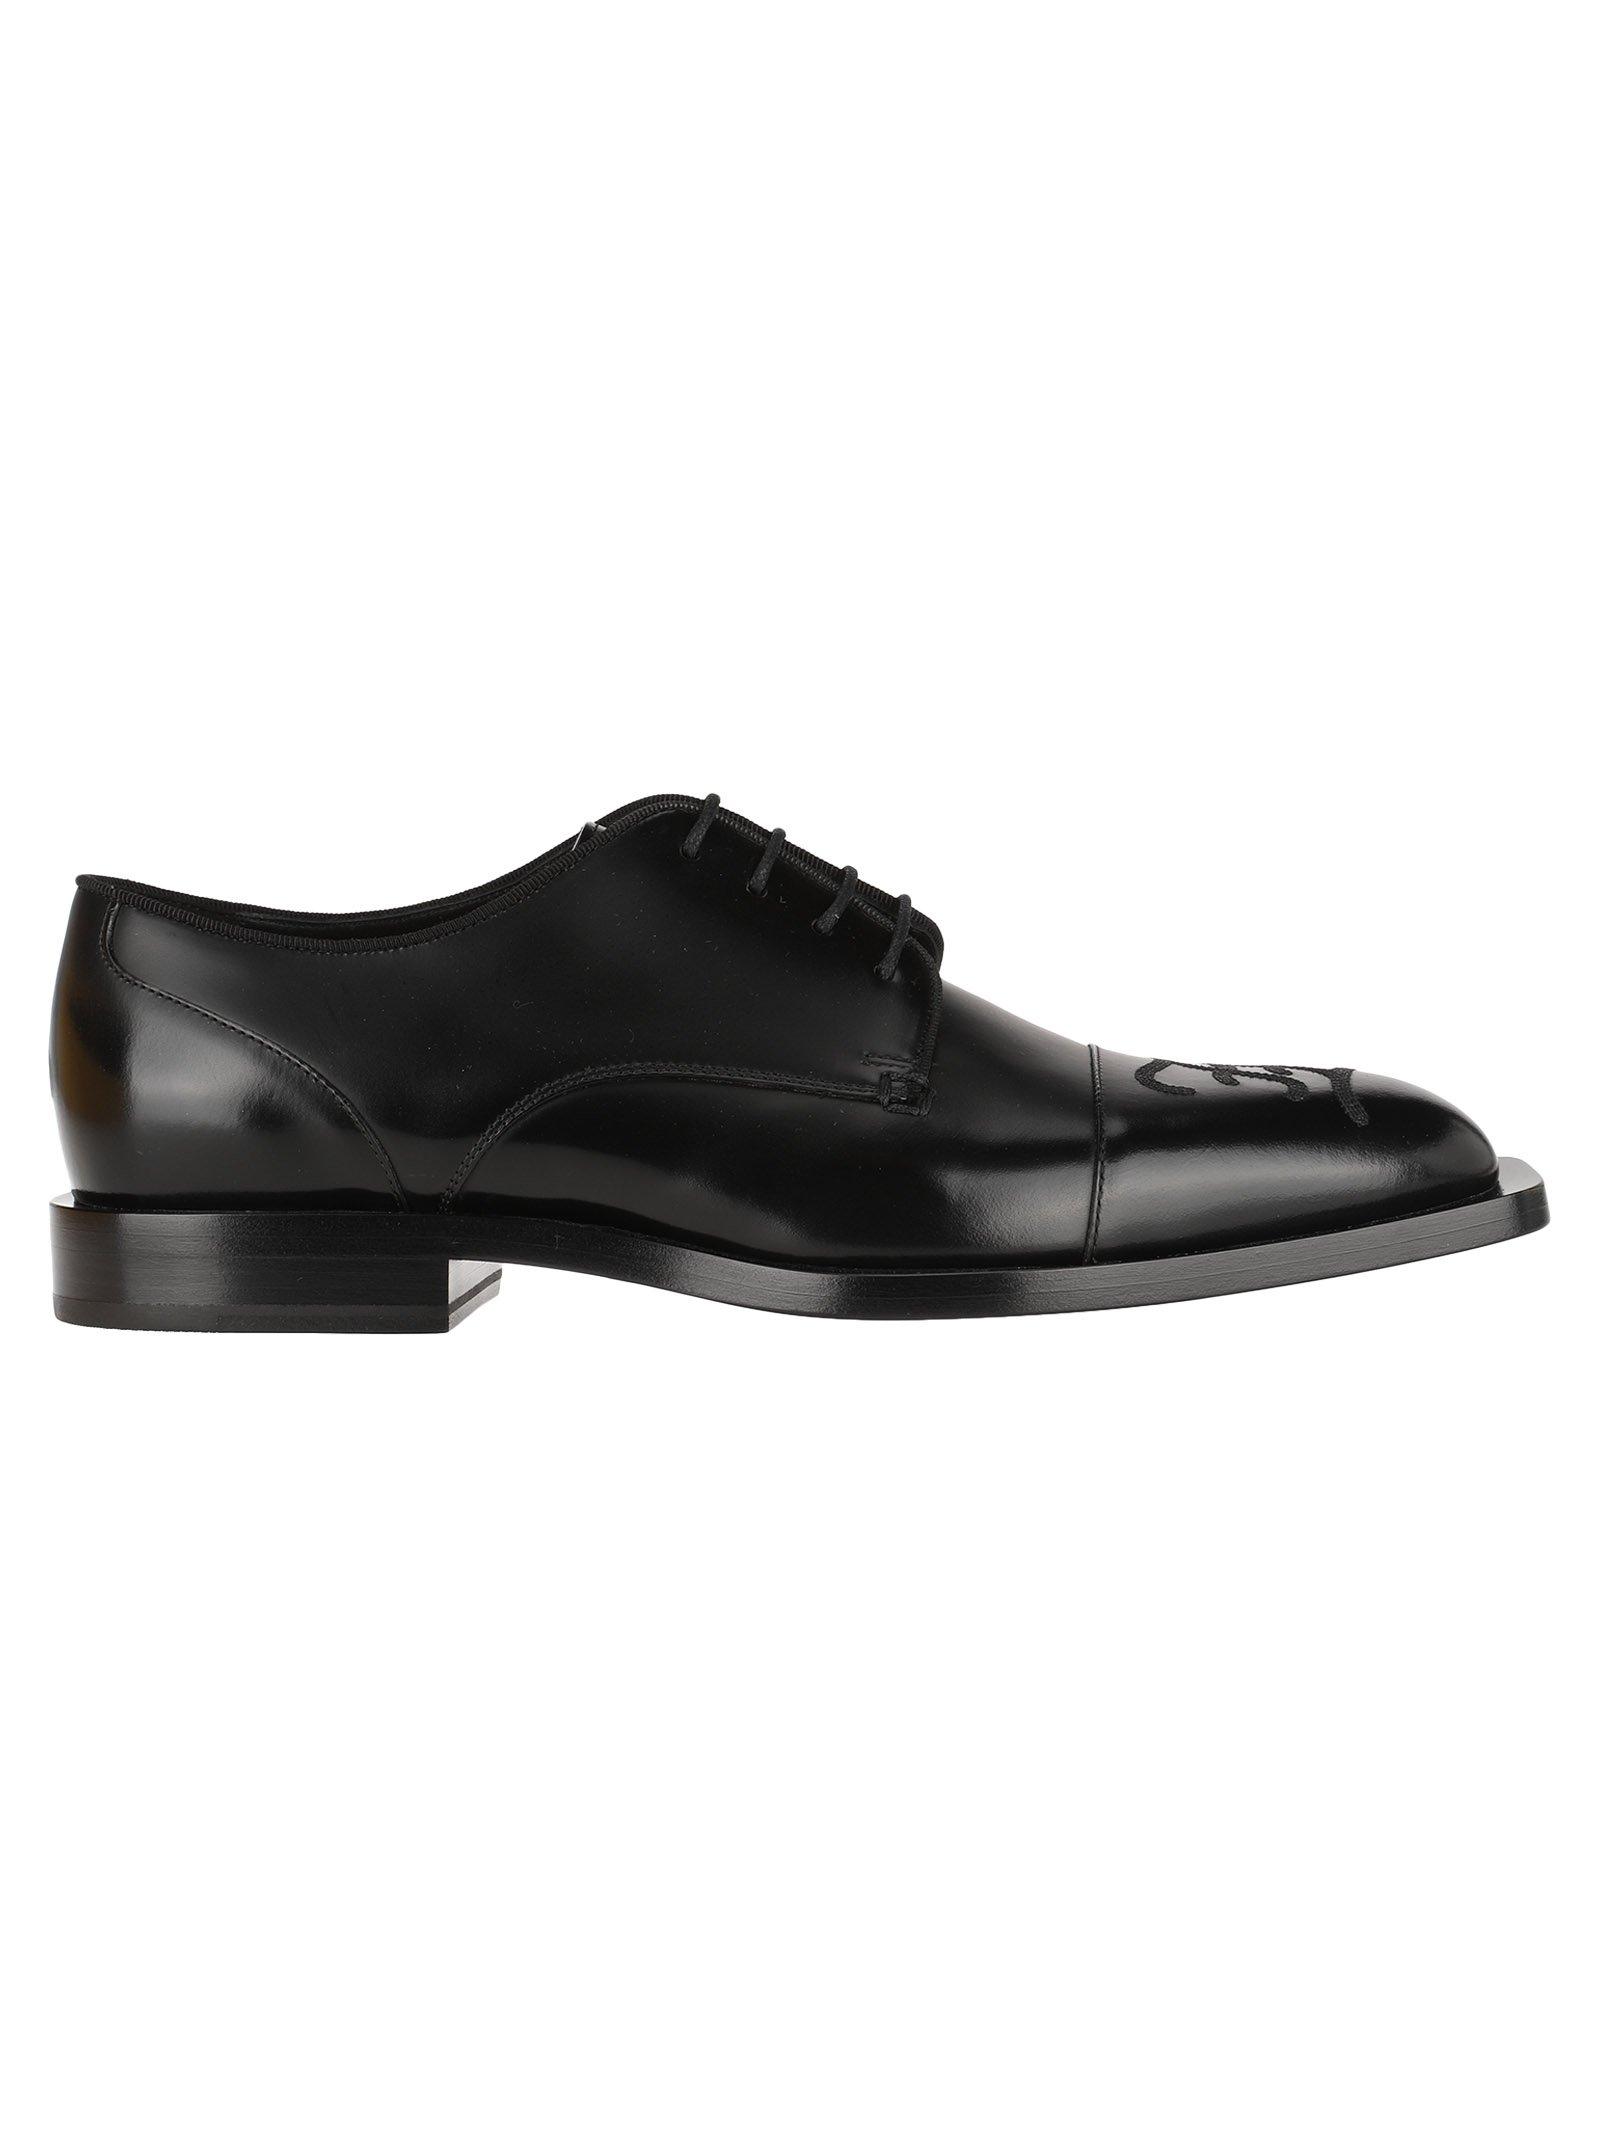 Fendi Leather Logo Lace-up Shoes in Black for Men - Lyst